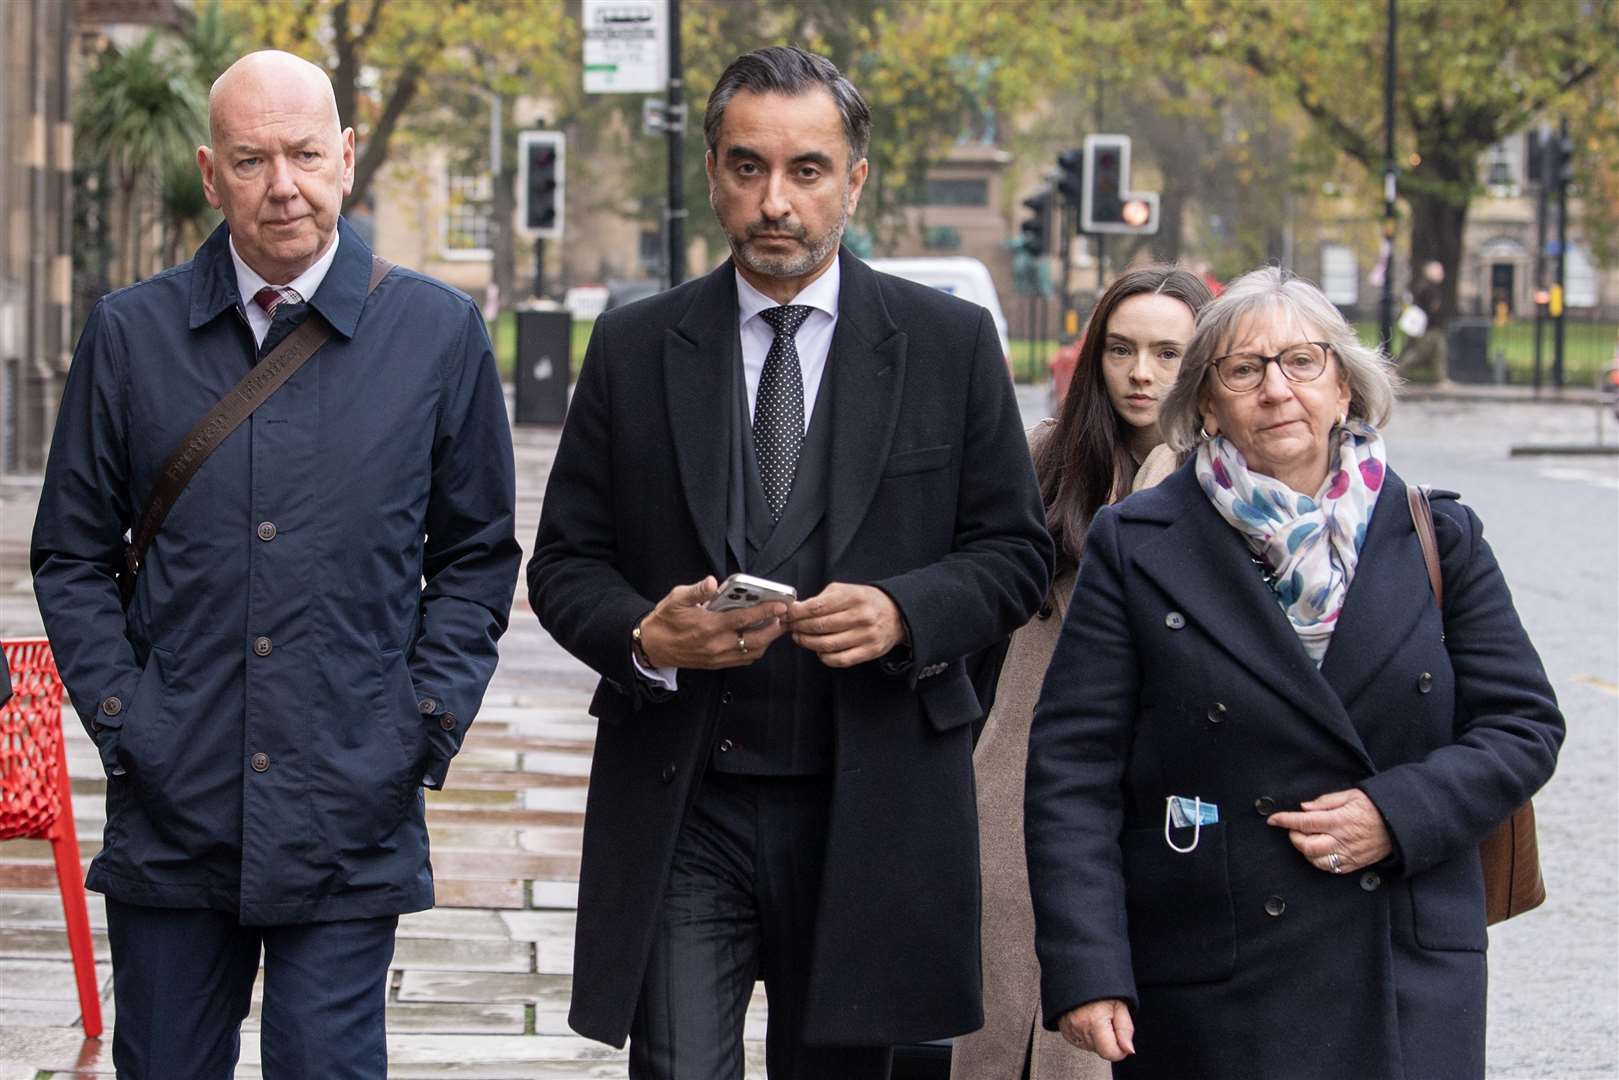 Bereaved relatives Alan Inglis (left), Margaret Waterton (right) and lead solicitor for Scottish Covid Bereaved Aamer Anwar (centre) arrive for the hearing (Lesley Martin/PA)